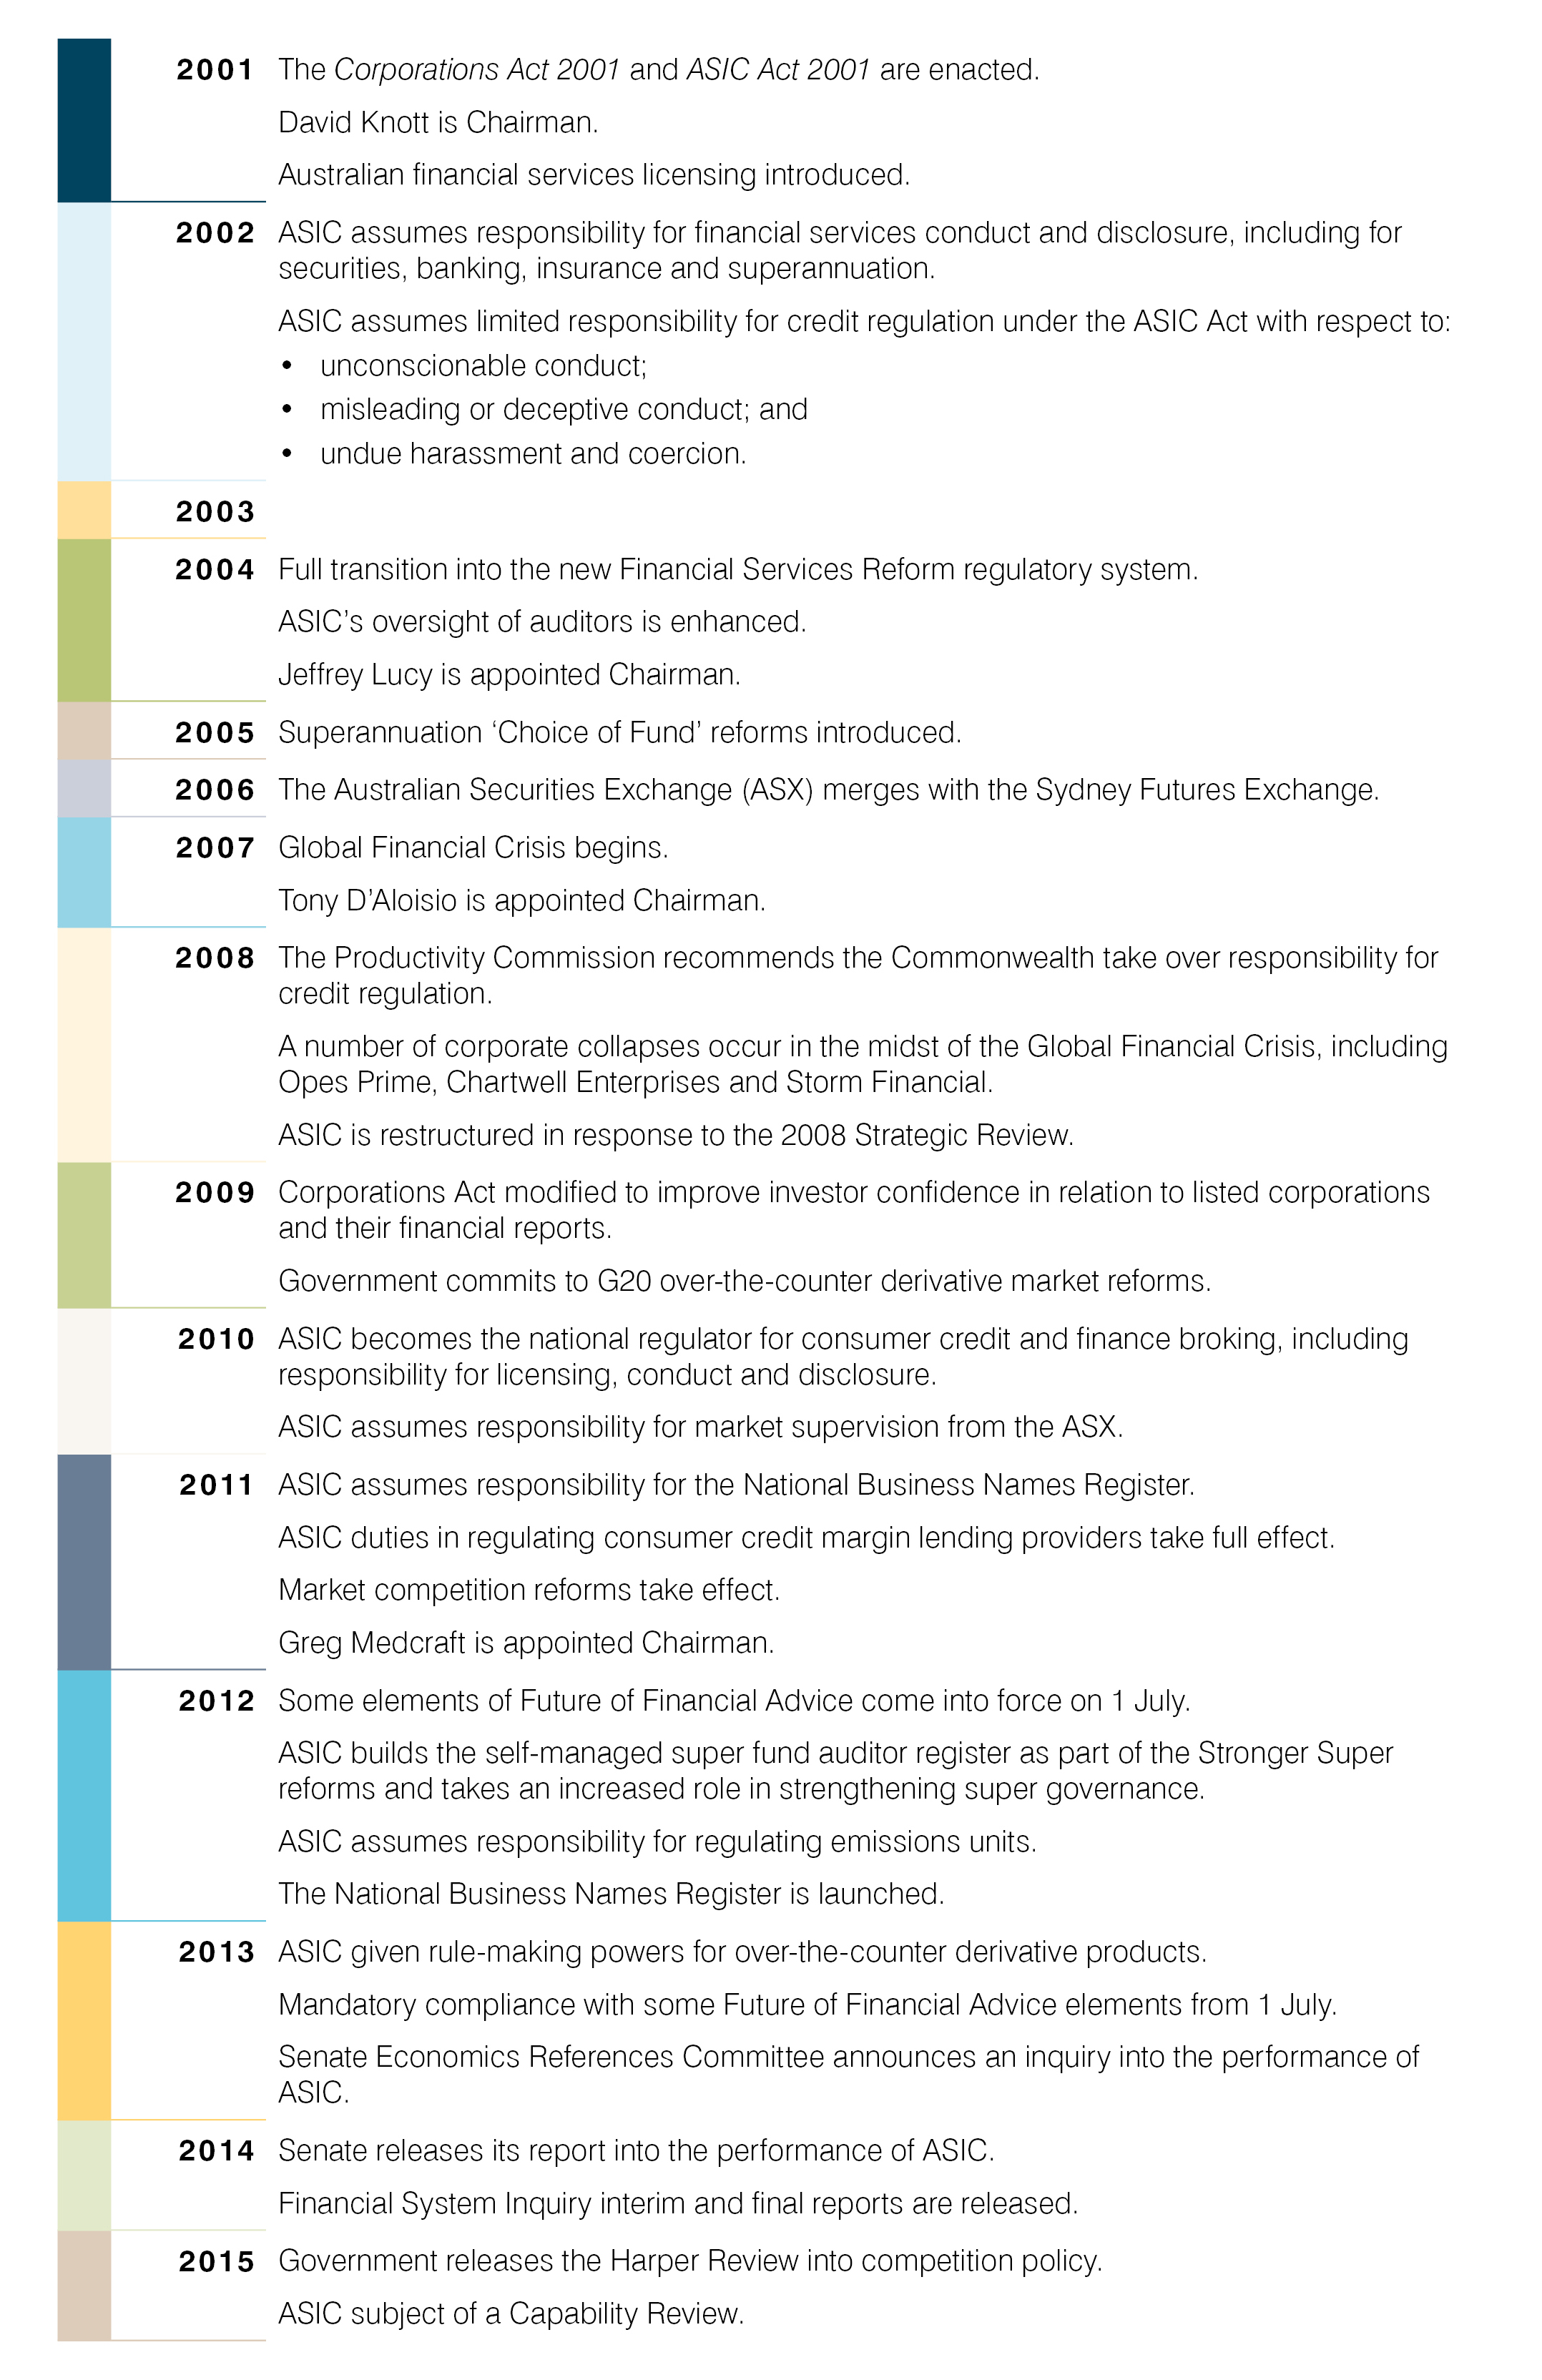 Figure 8: Overview of ASIC's history